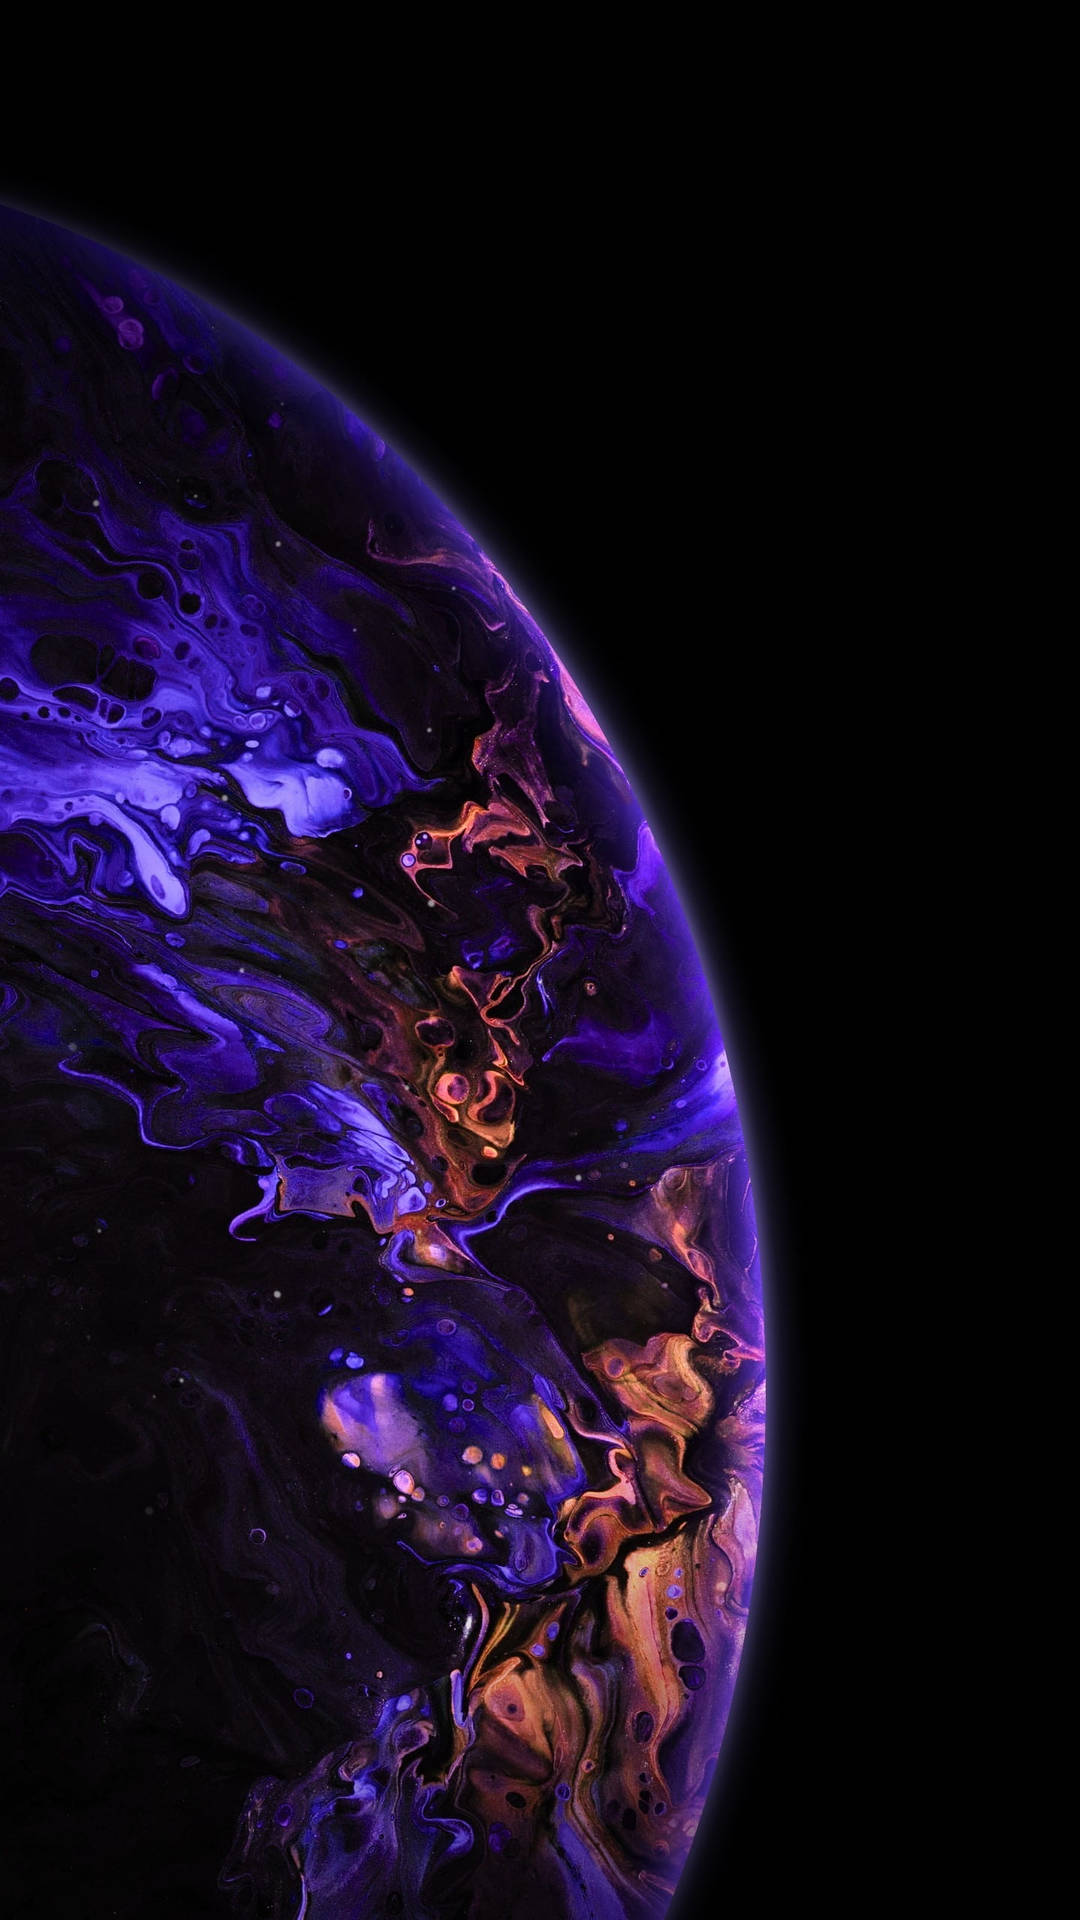 "Discover New Worlds with the Iphone Xs Planet" Wallpaper